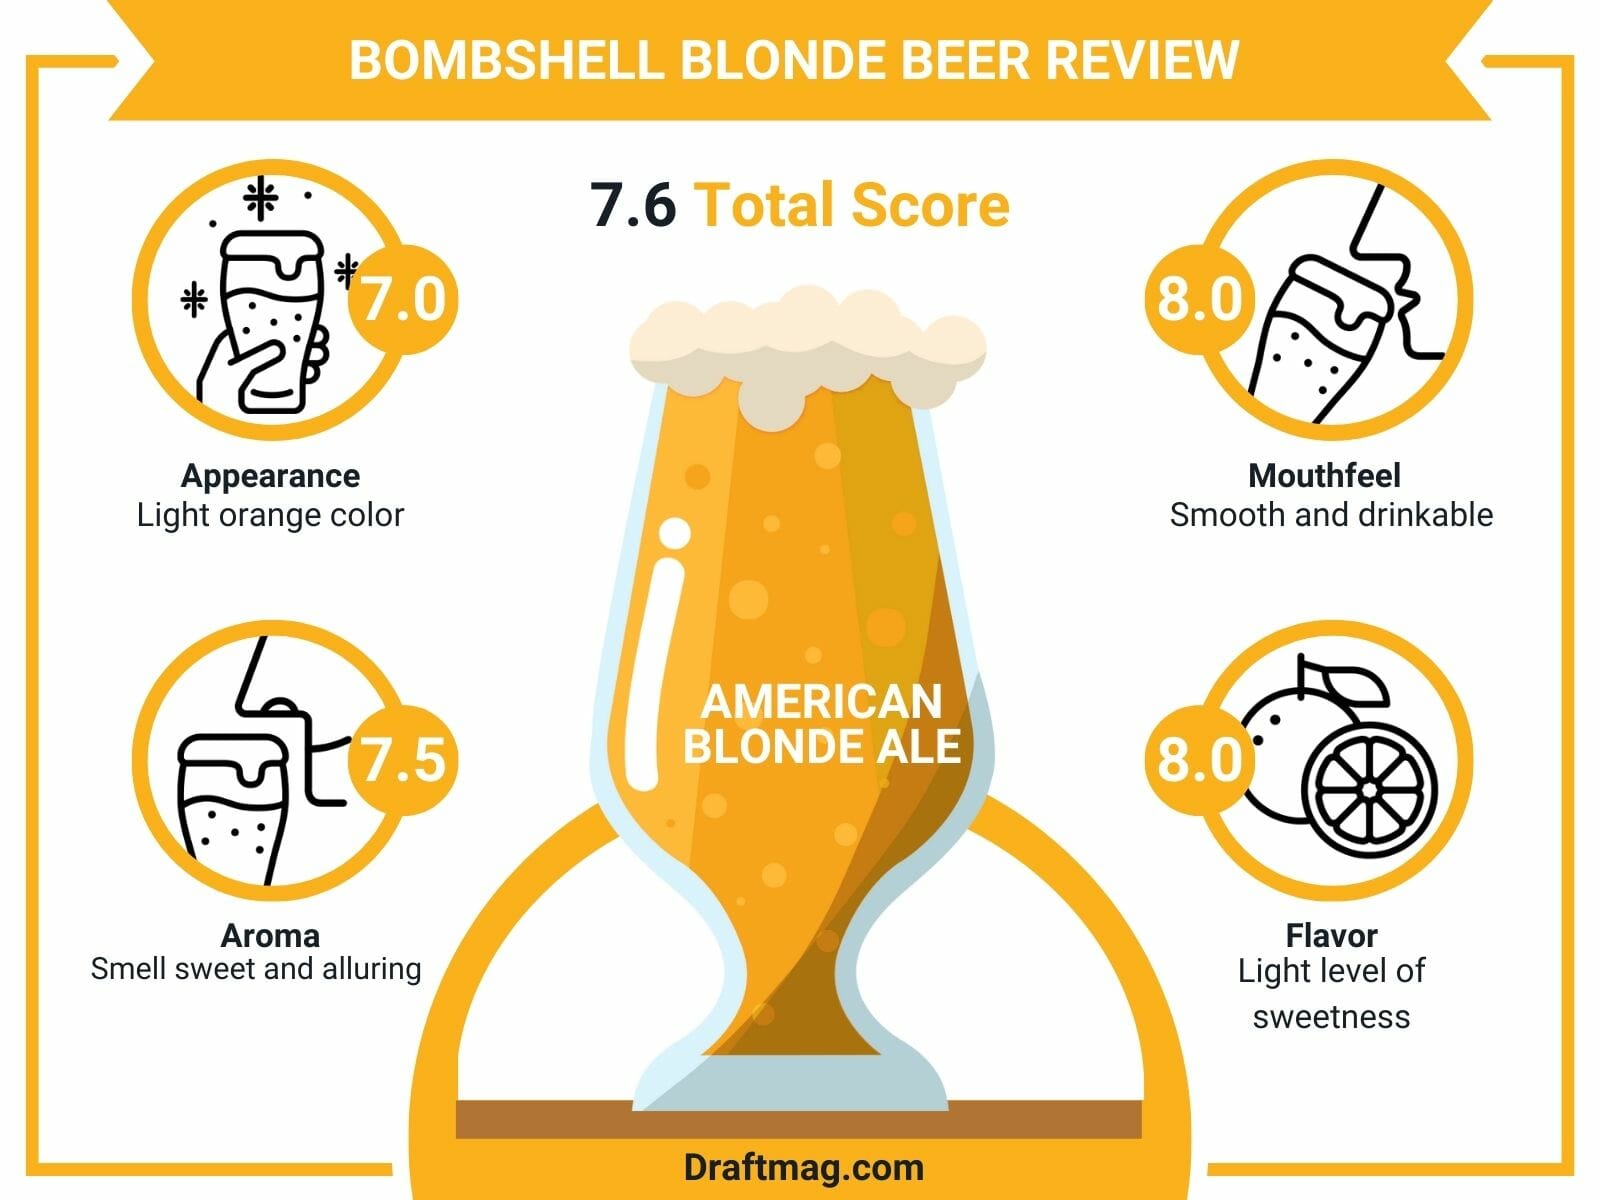 Bombshell Blonde Beer Review Infographic